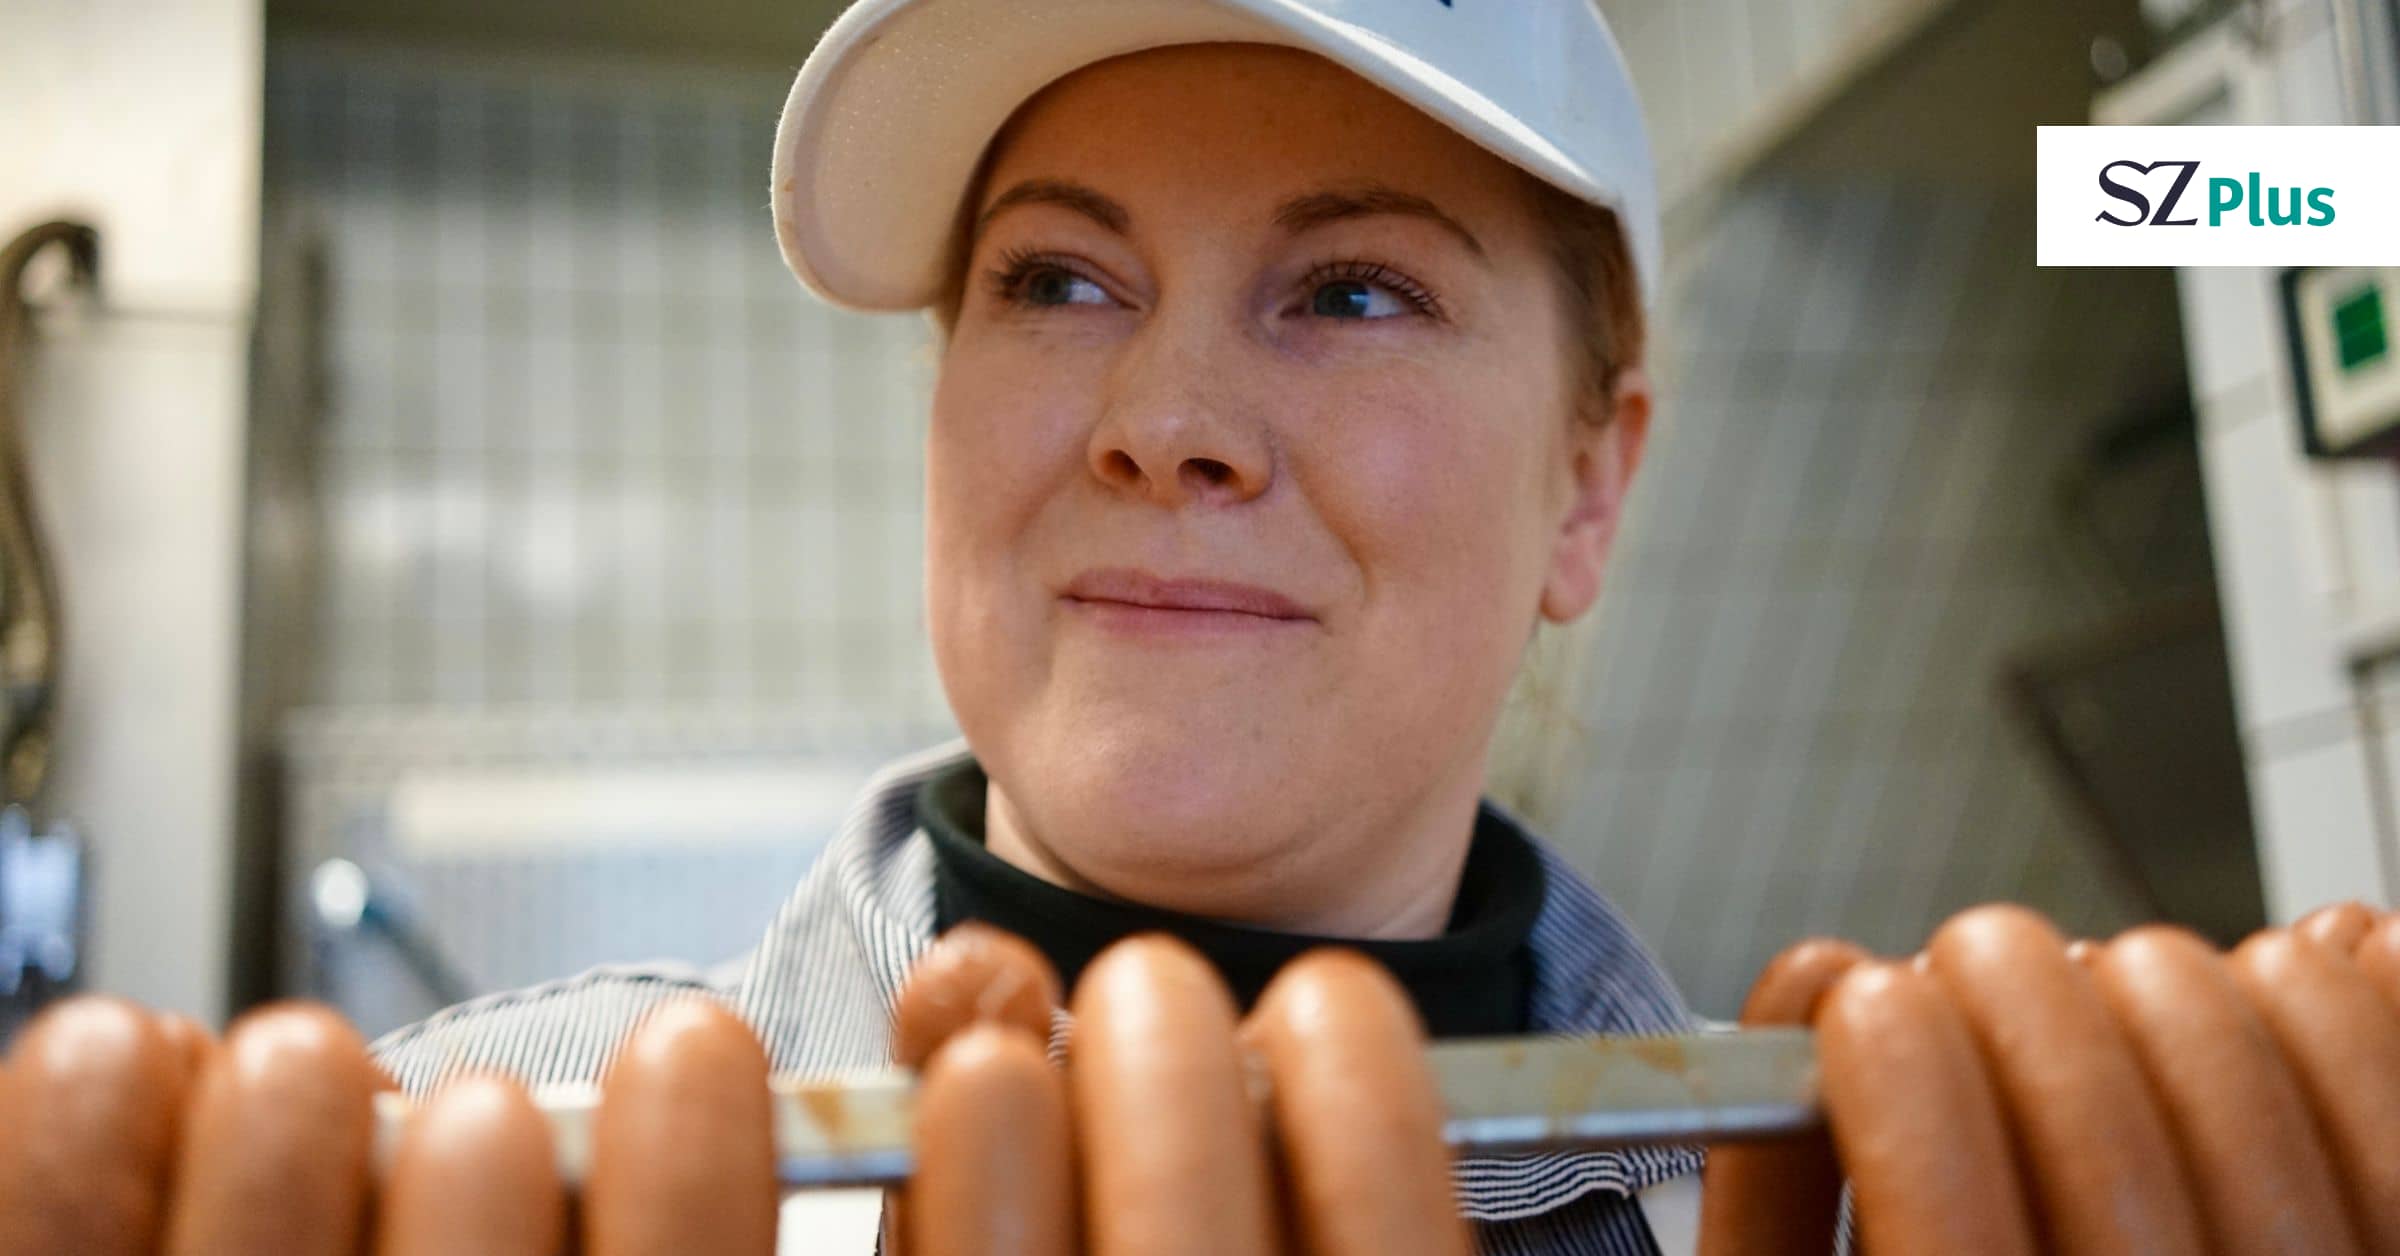 Meat consumption: the sausage queen